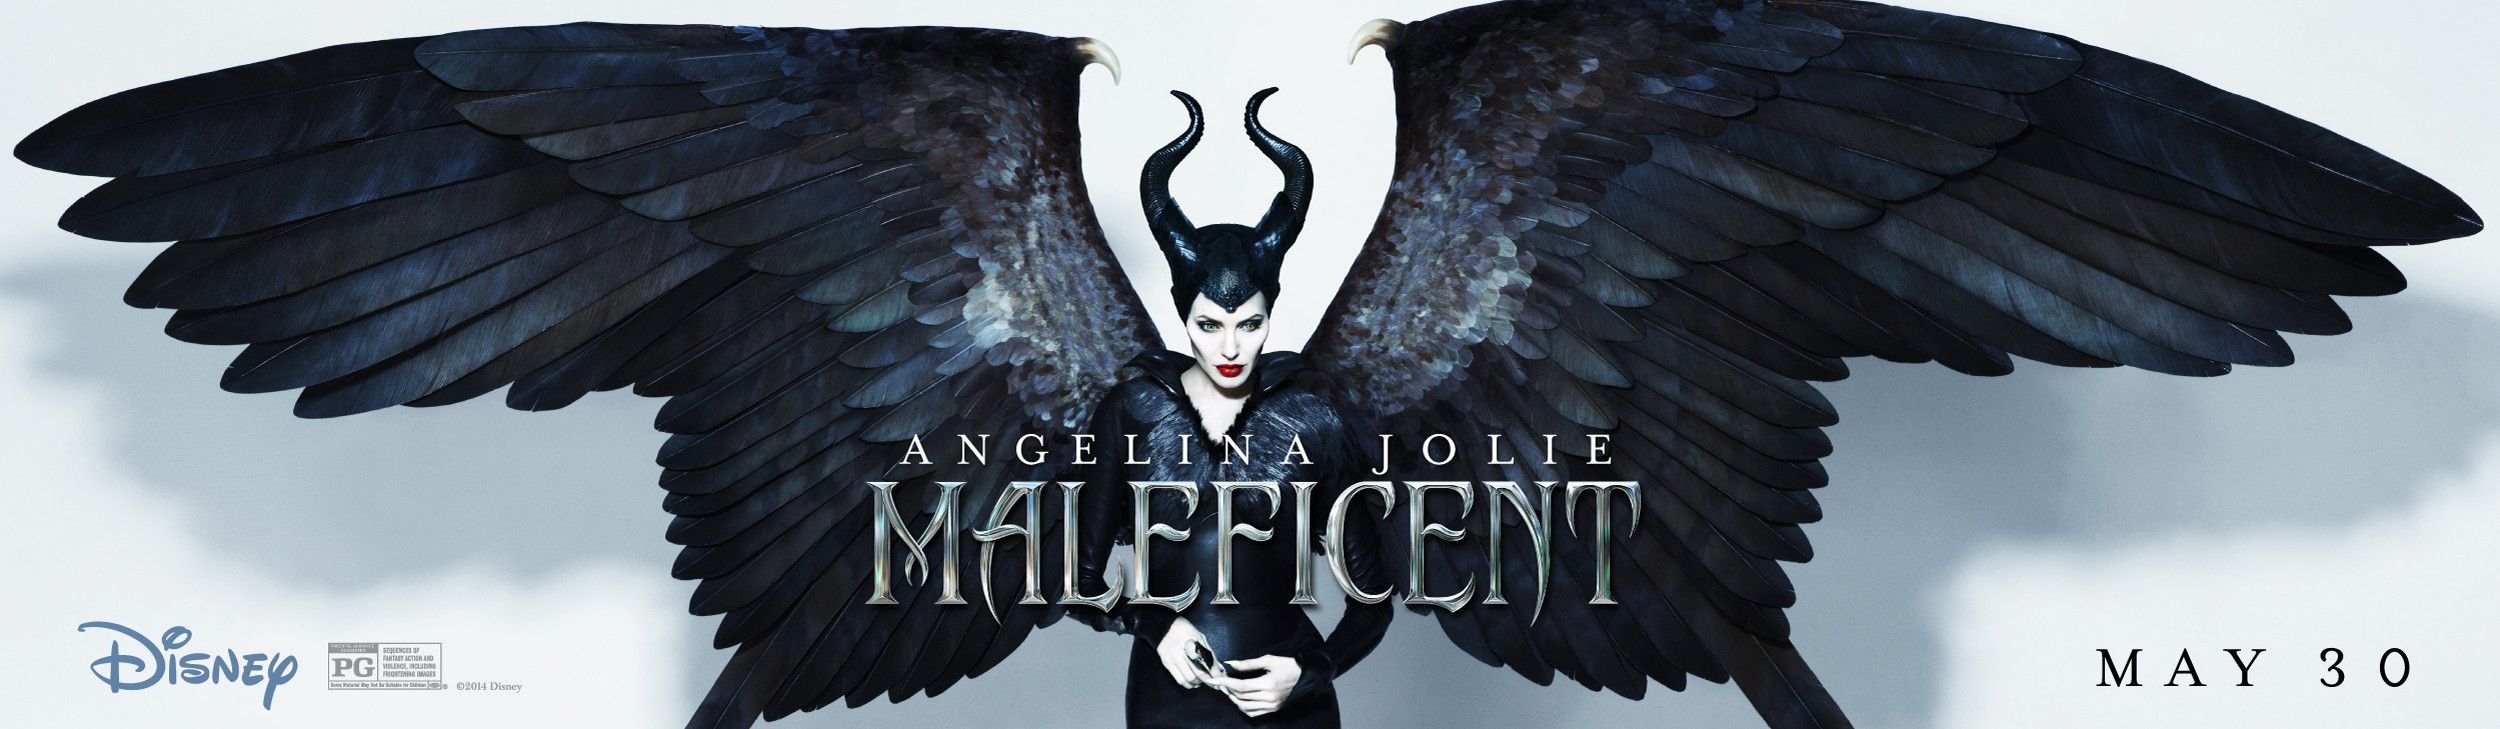 Maleficent Wings Poster